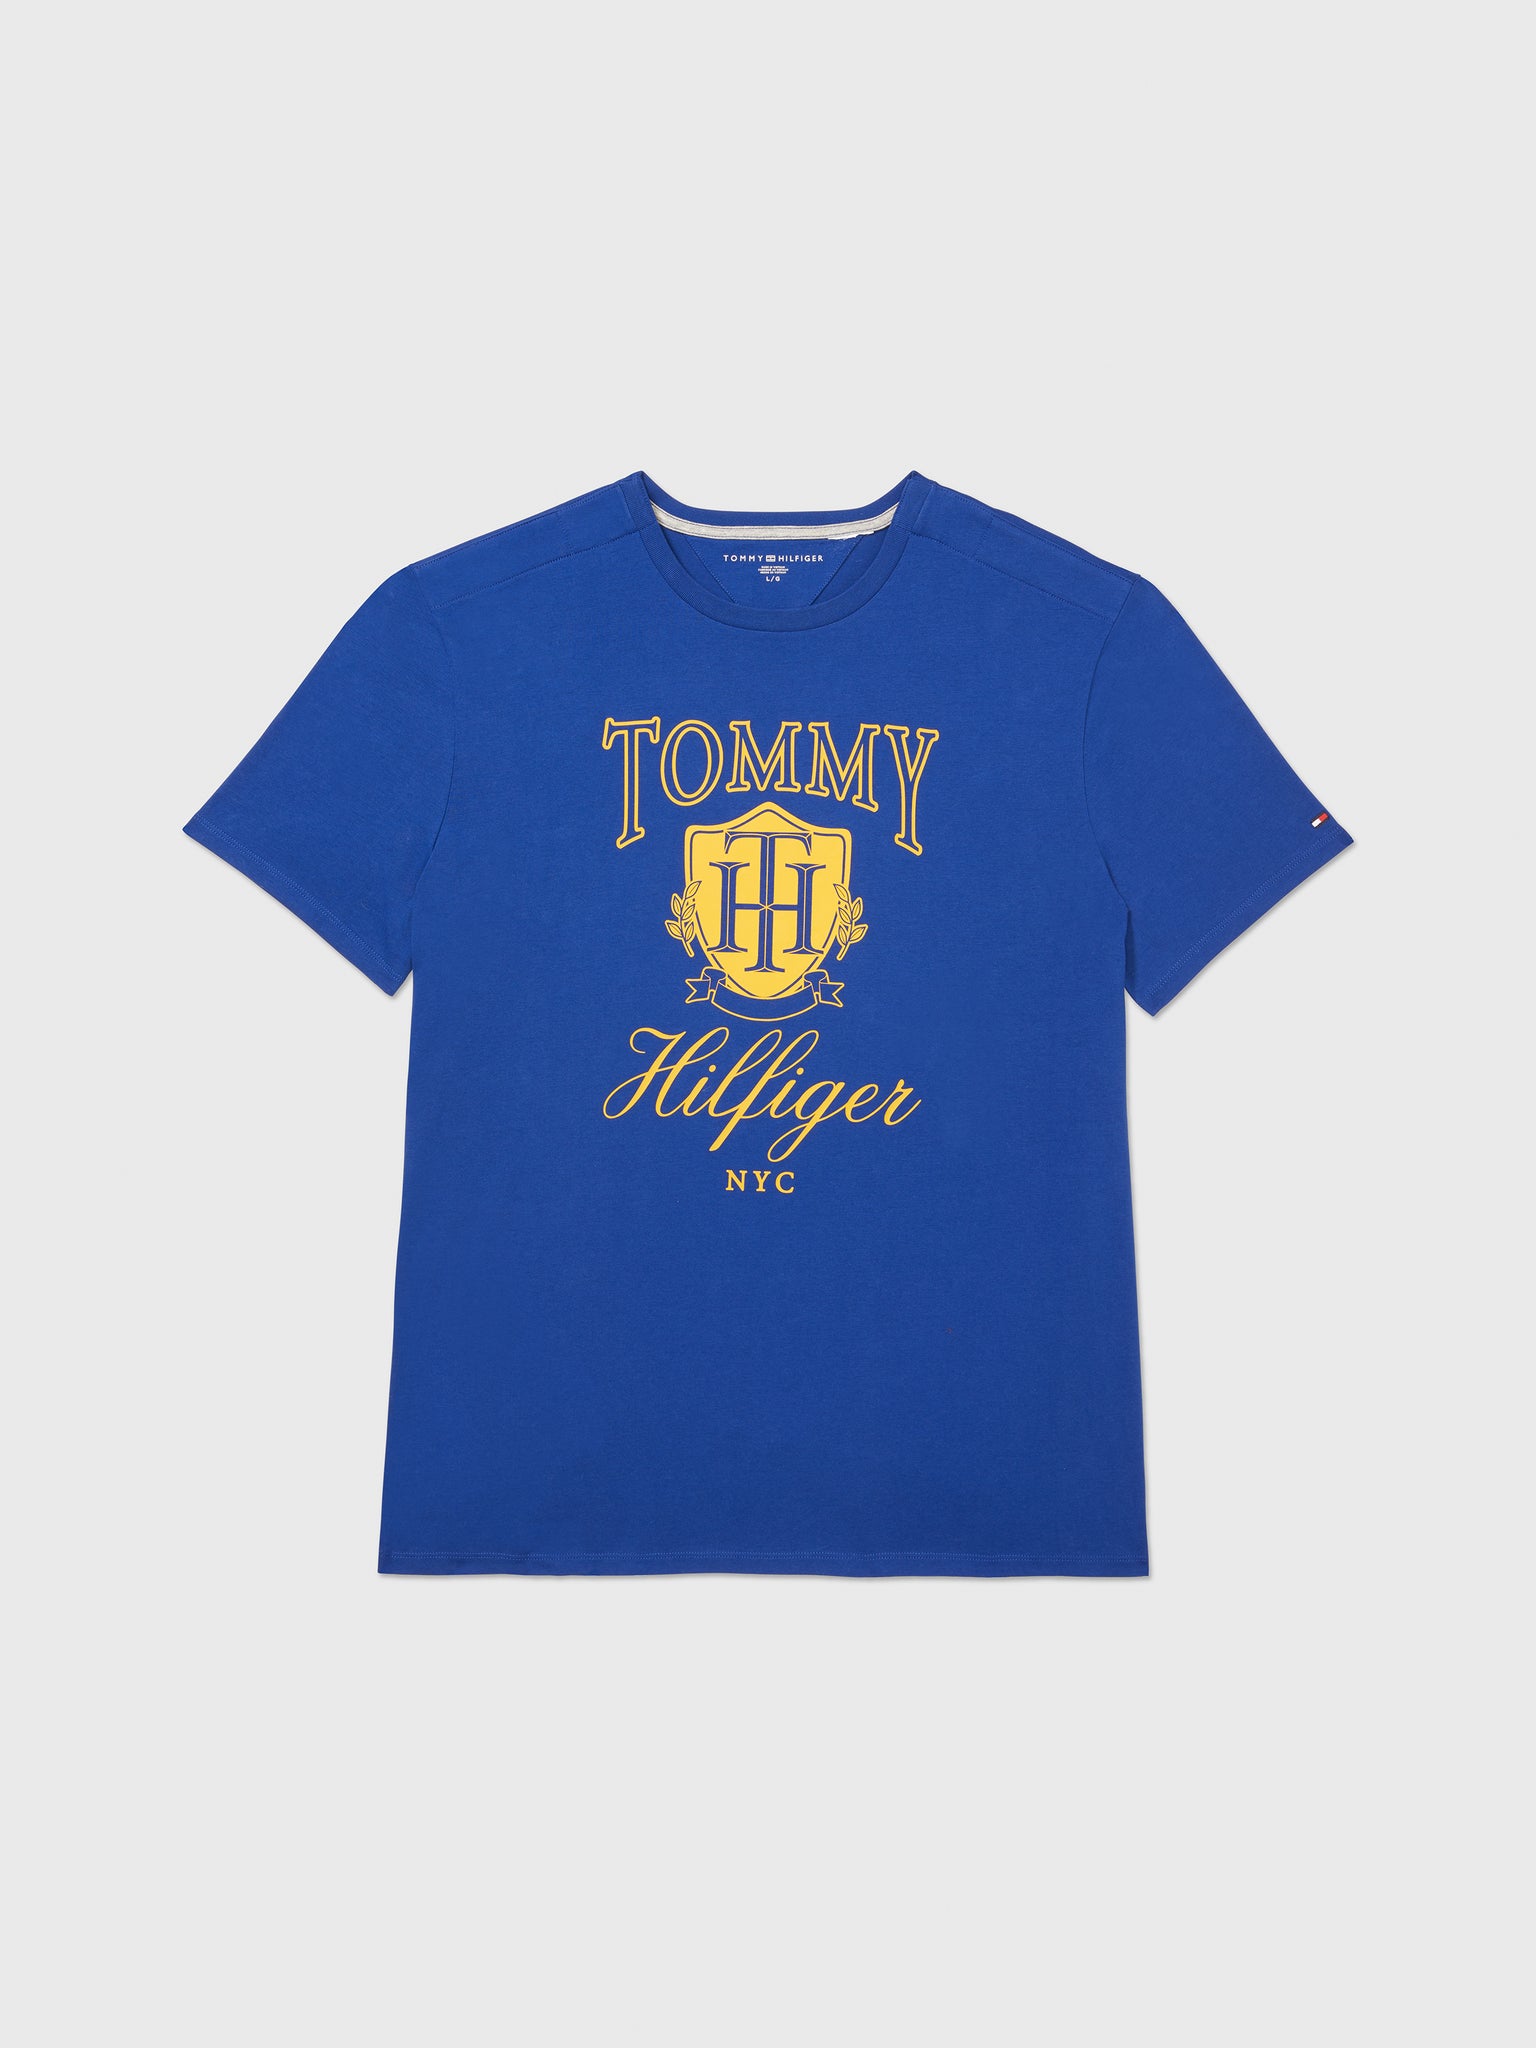 Founders Tee (Mens) - Midnight Blue